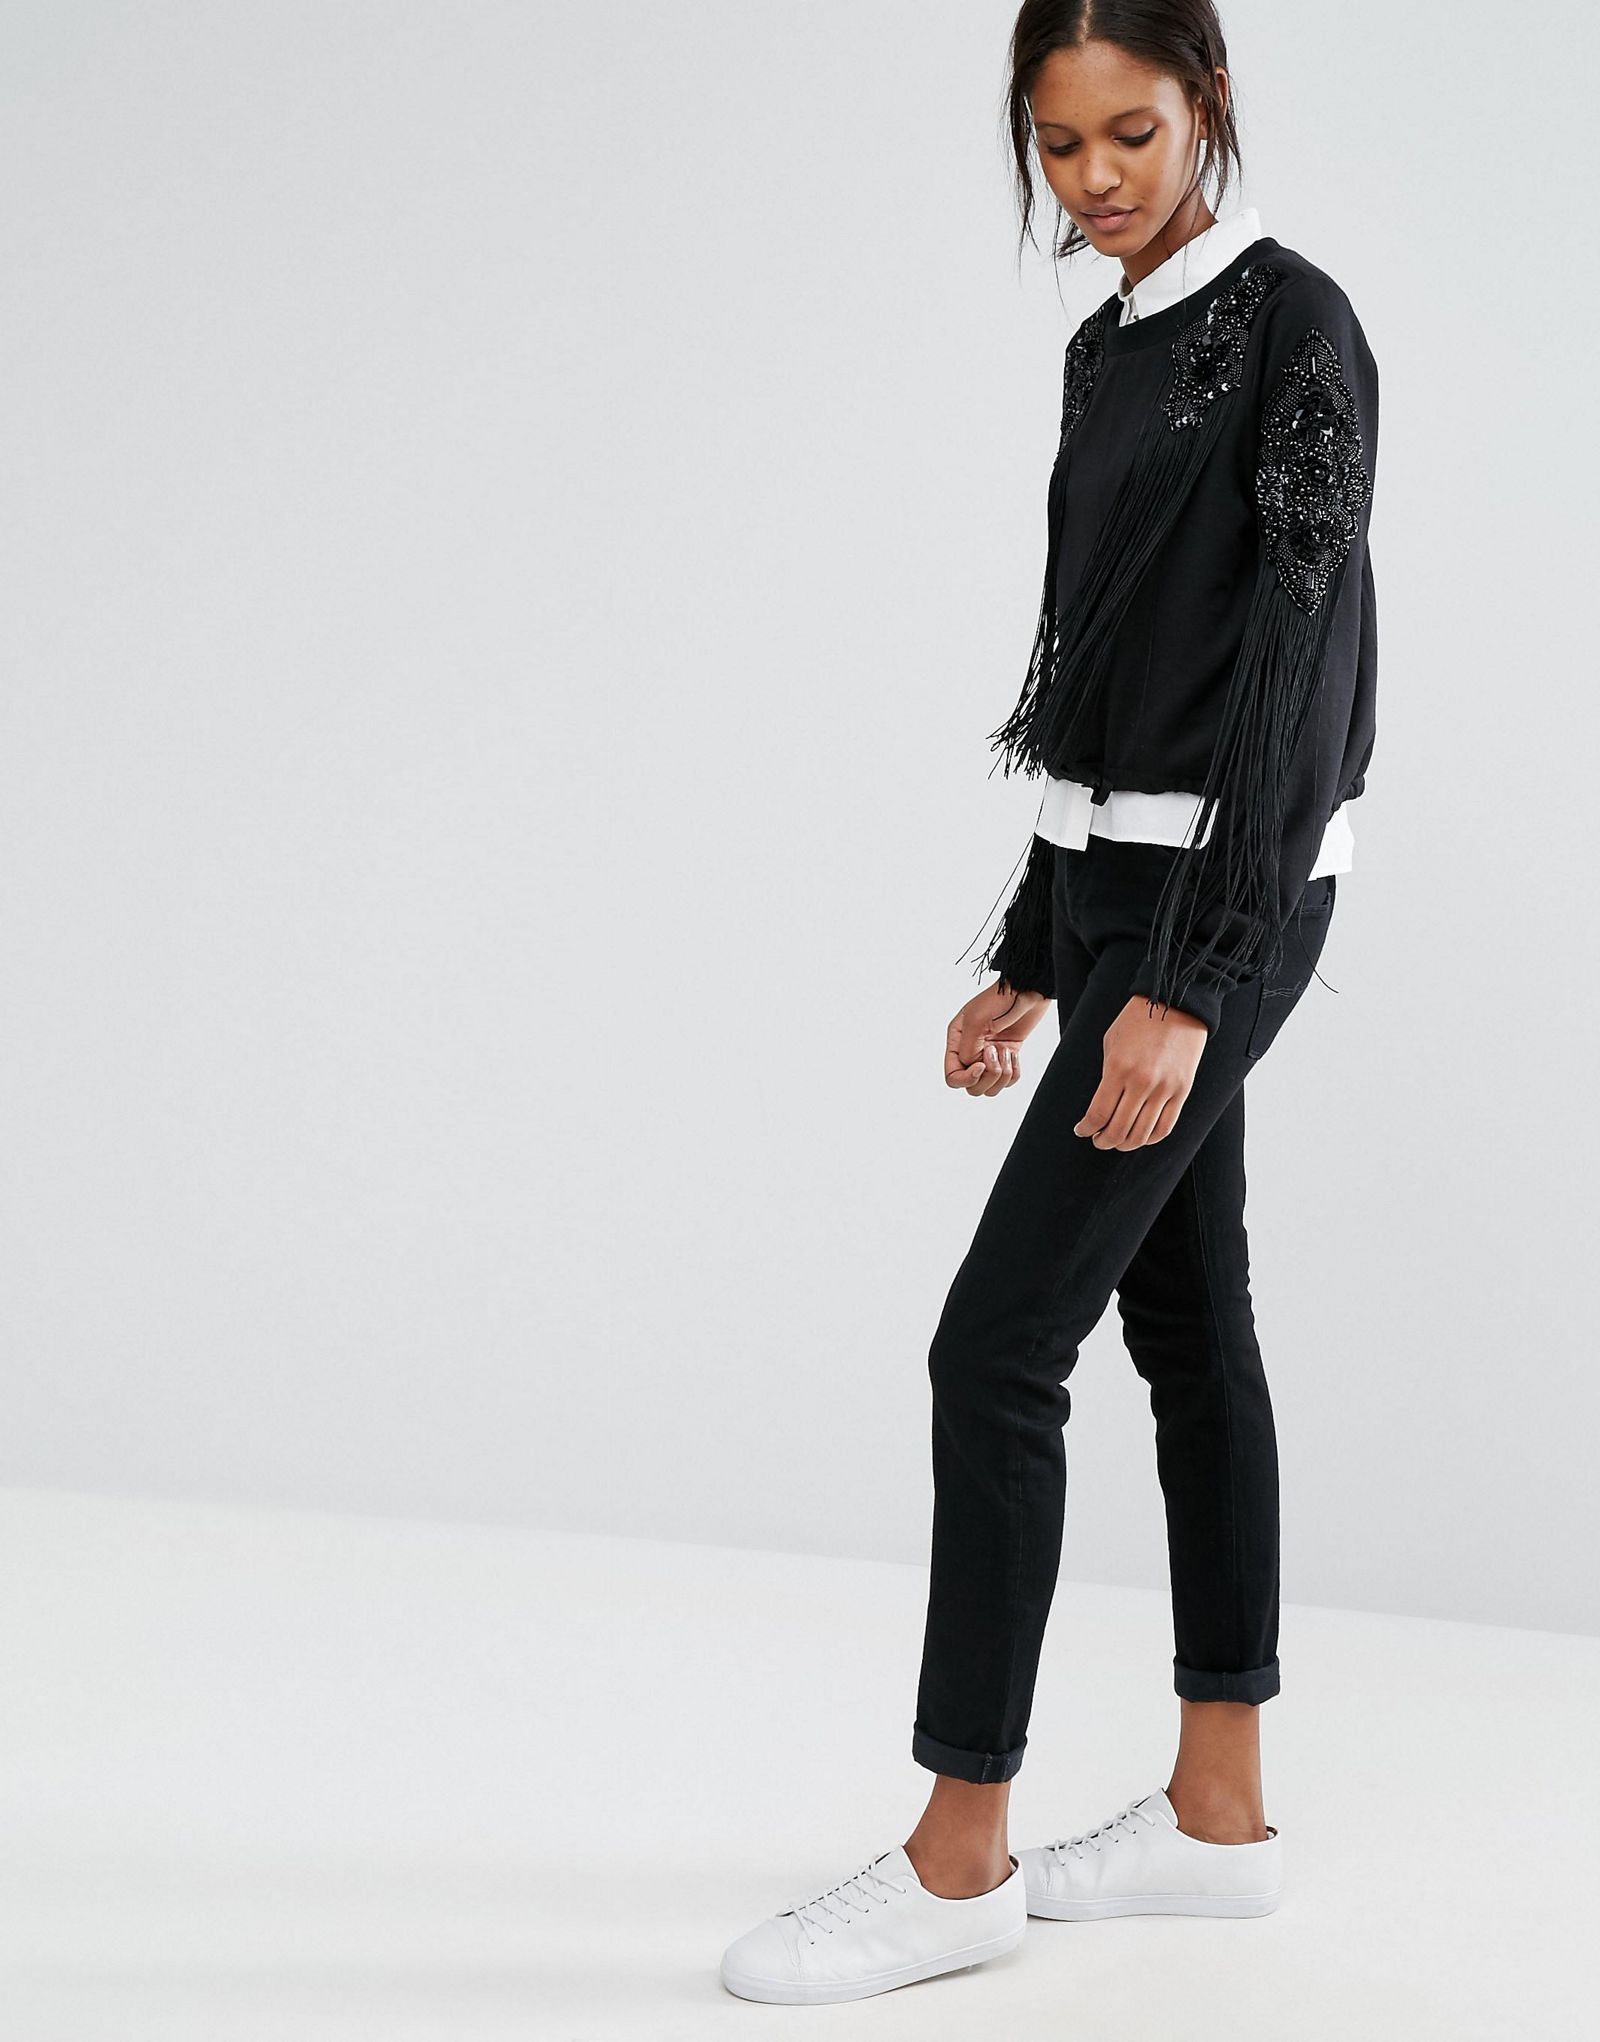 Starry Eyed Tall Crop Sweatshirt With Beaded Sleeve Detail And Tie Waist